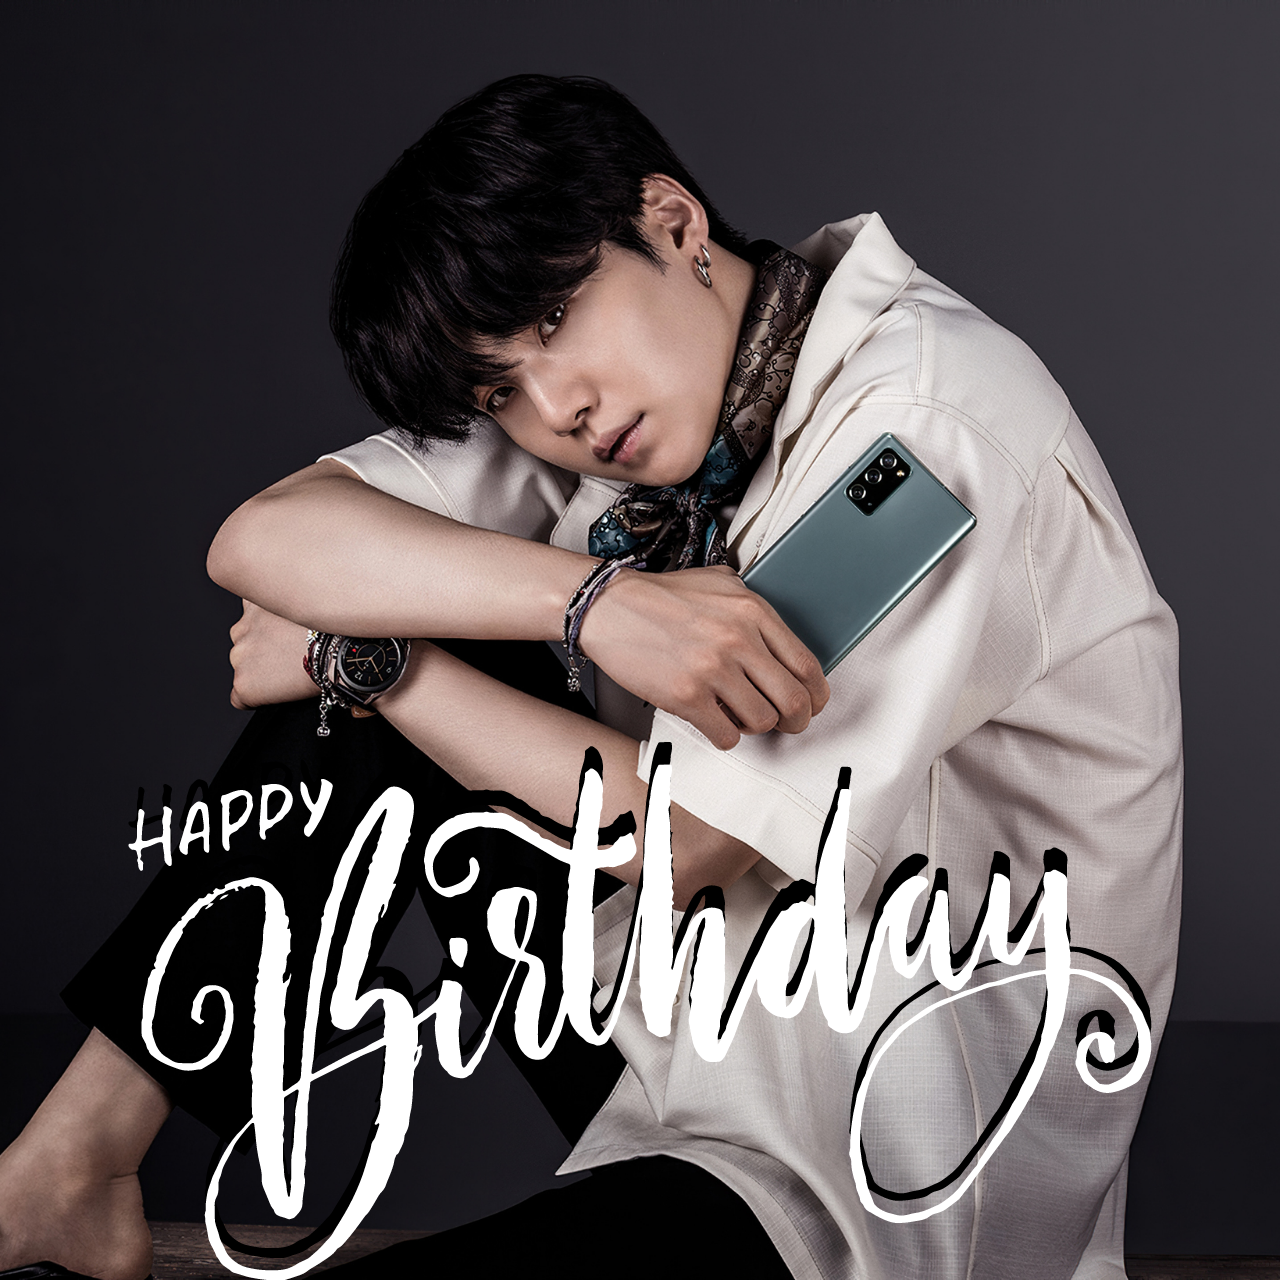 Happy Birthday Suga: Sweet Wishes, HD Images, Messages, WhatsApp Status Videos to greet 'Min Yoongi'